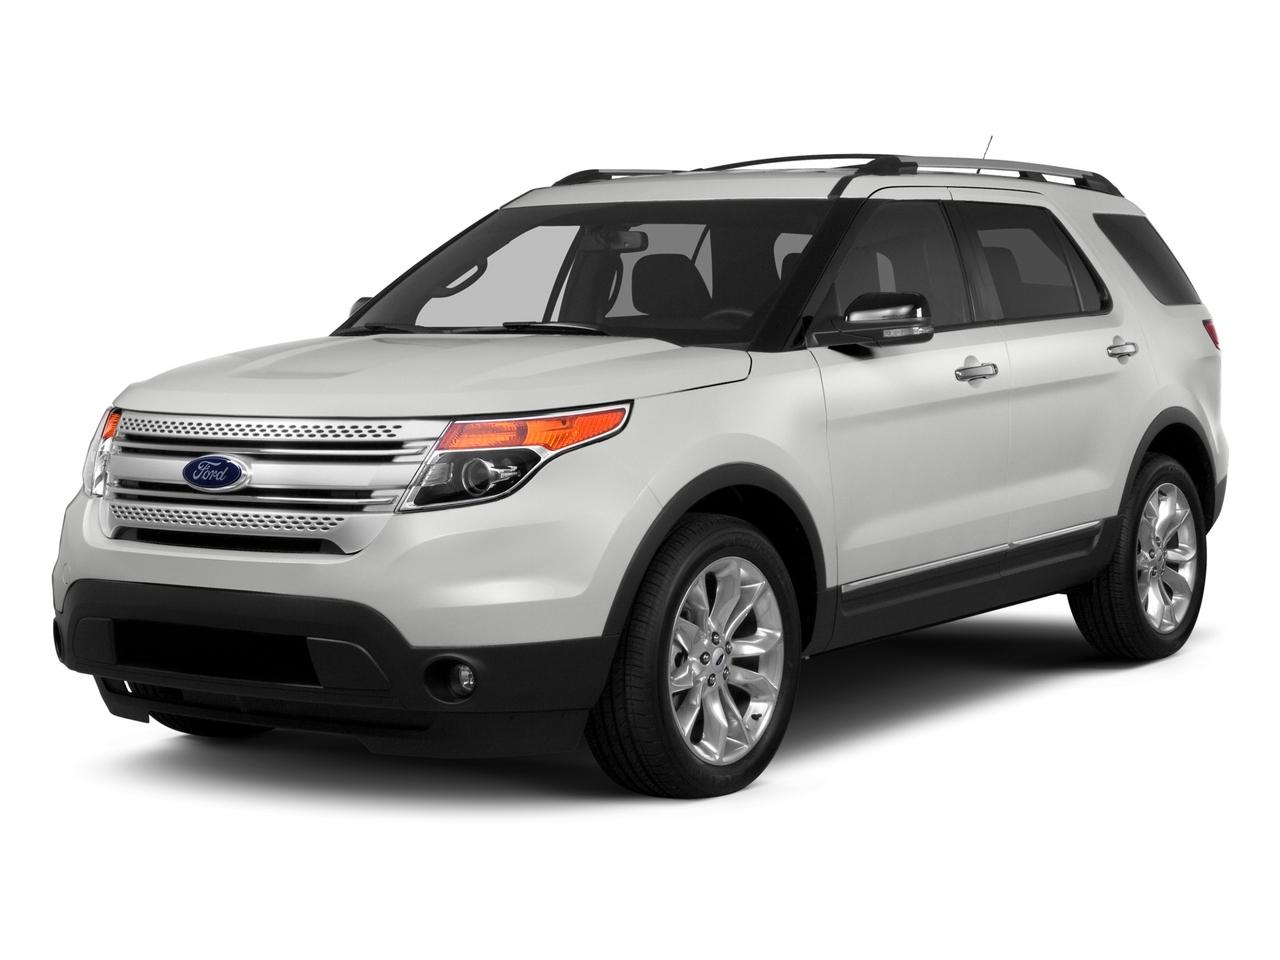 2015 Ford Explorer Vehicle Photo in Pilot Point, TX 76258-6053